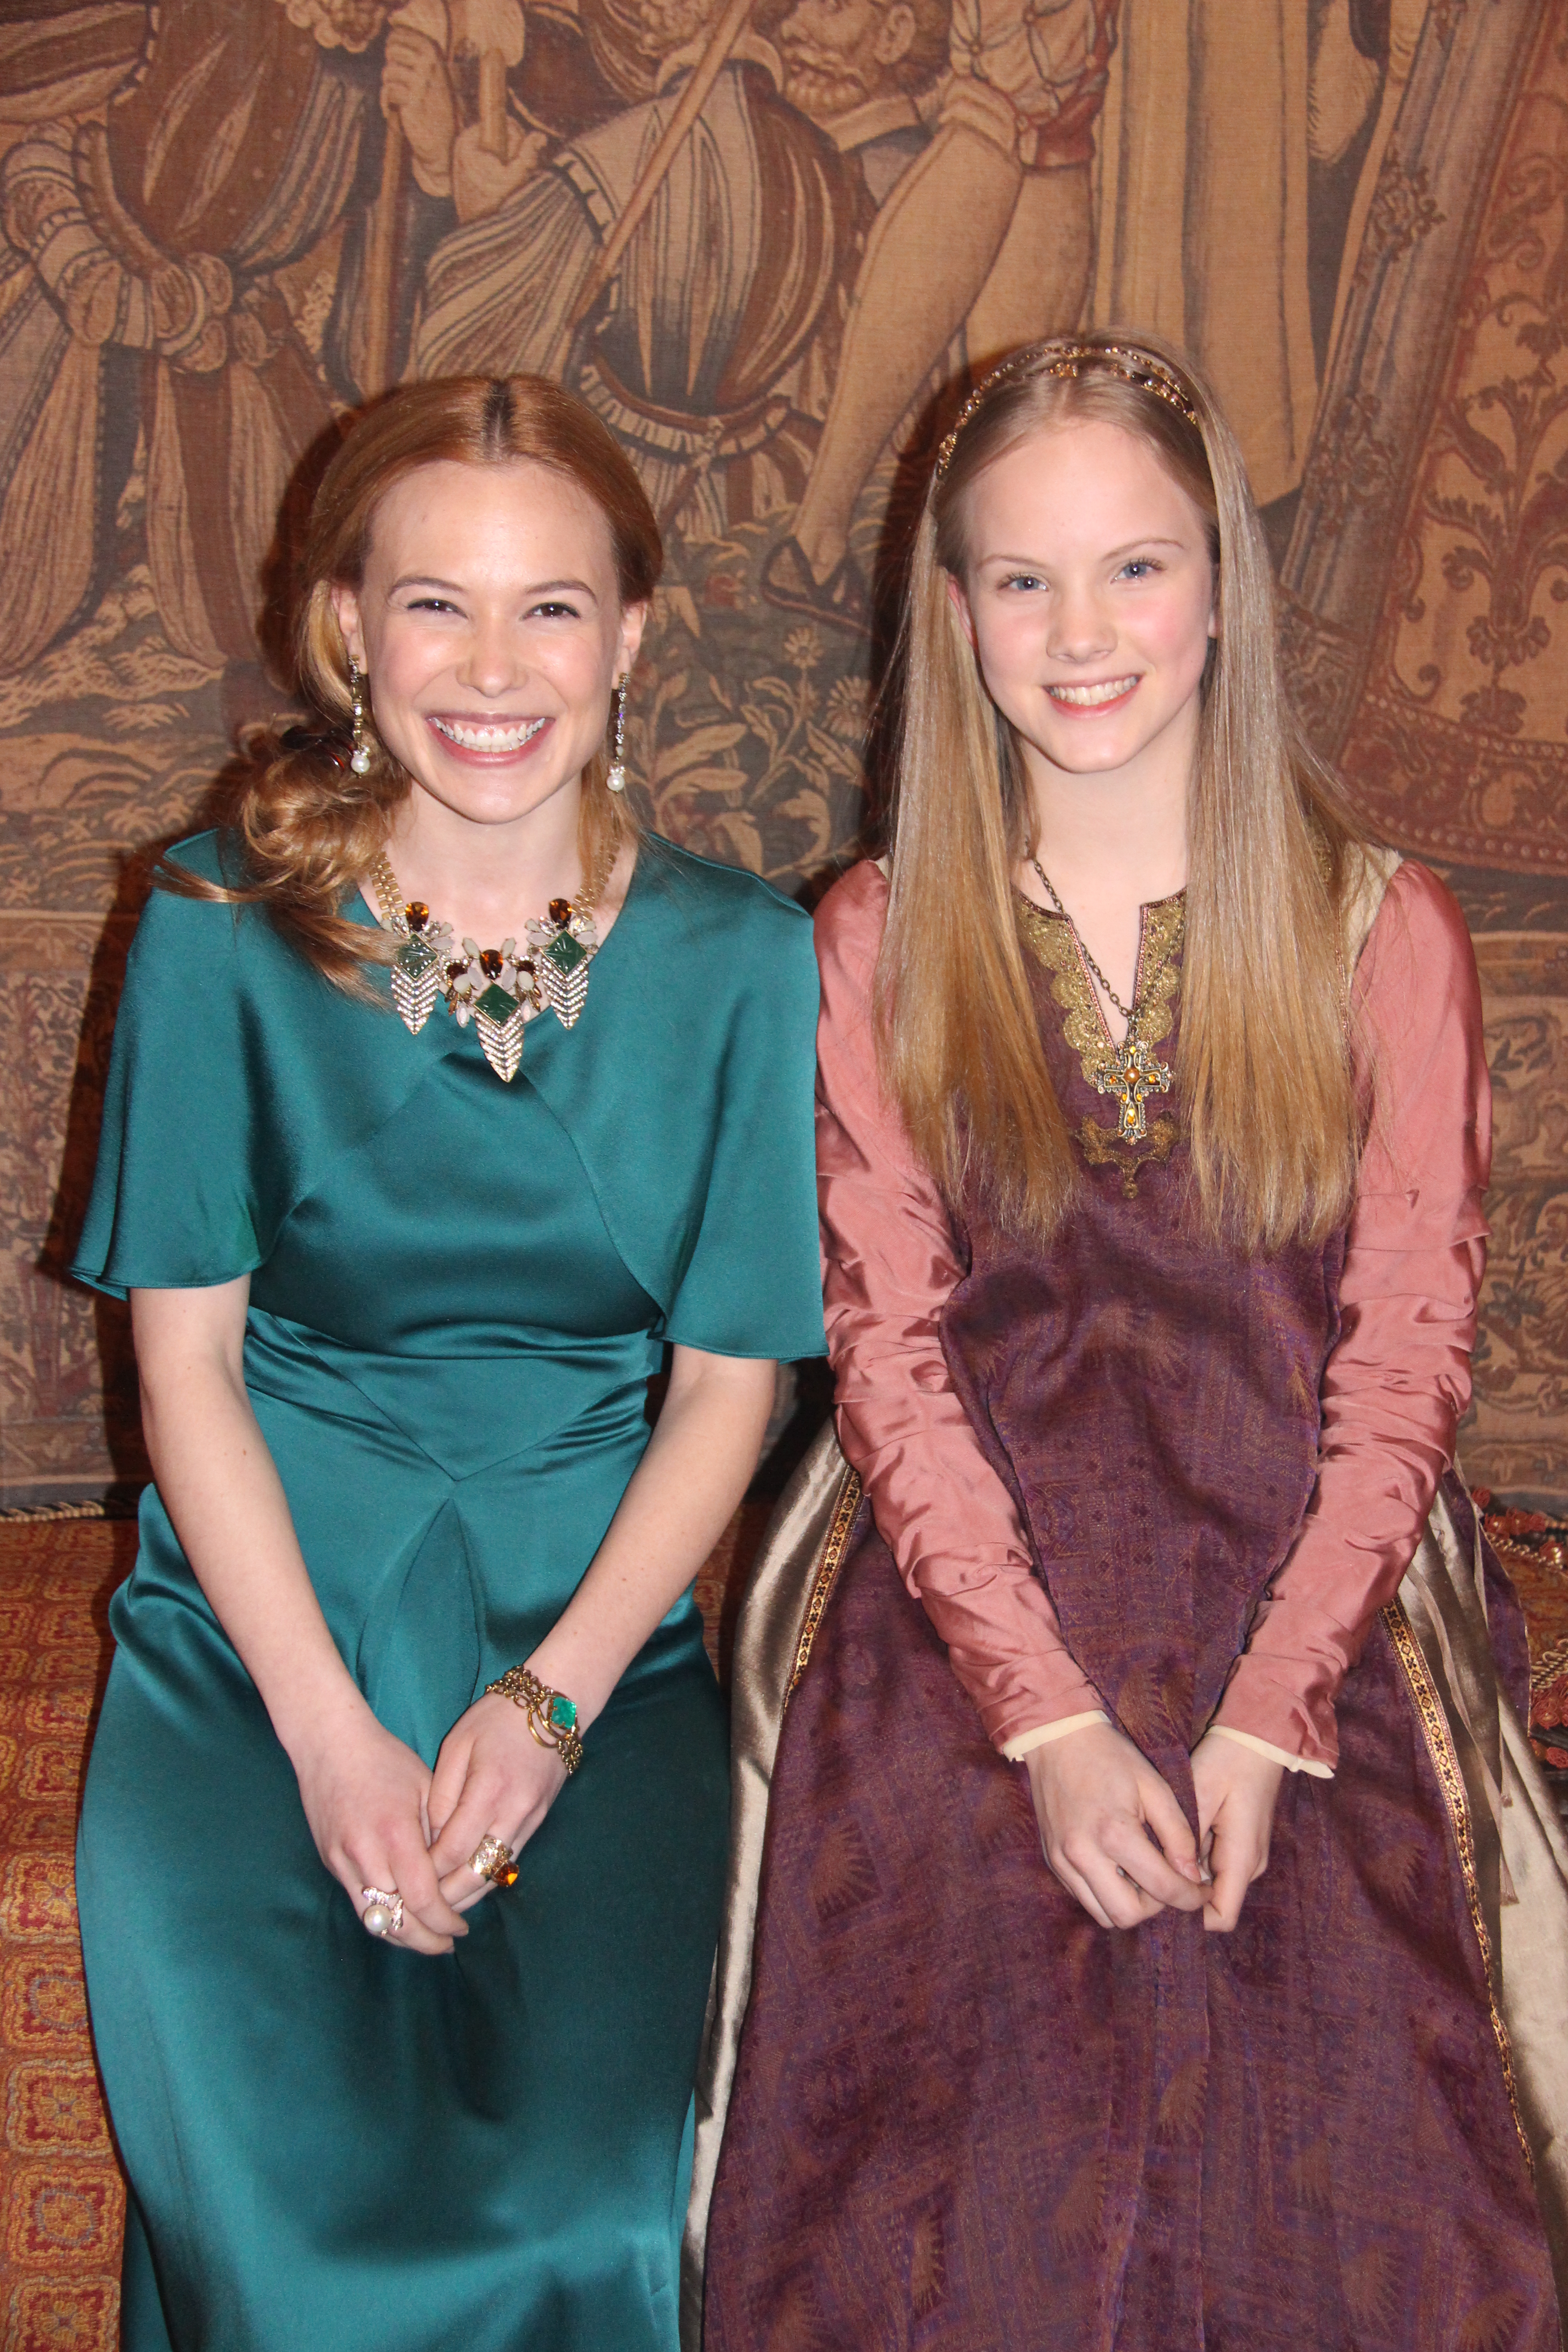 REIGN - Celina Sinden (Greer) and Jenna Warren (Ainsley) on the set of Reign.